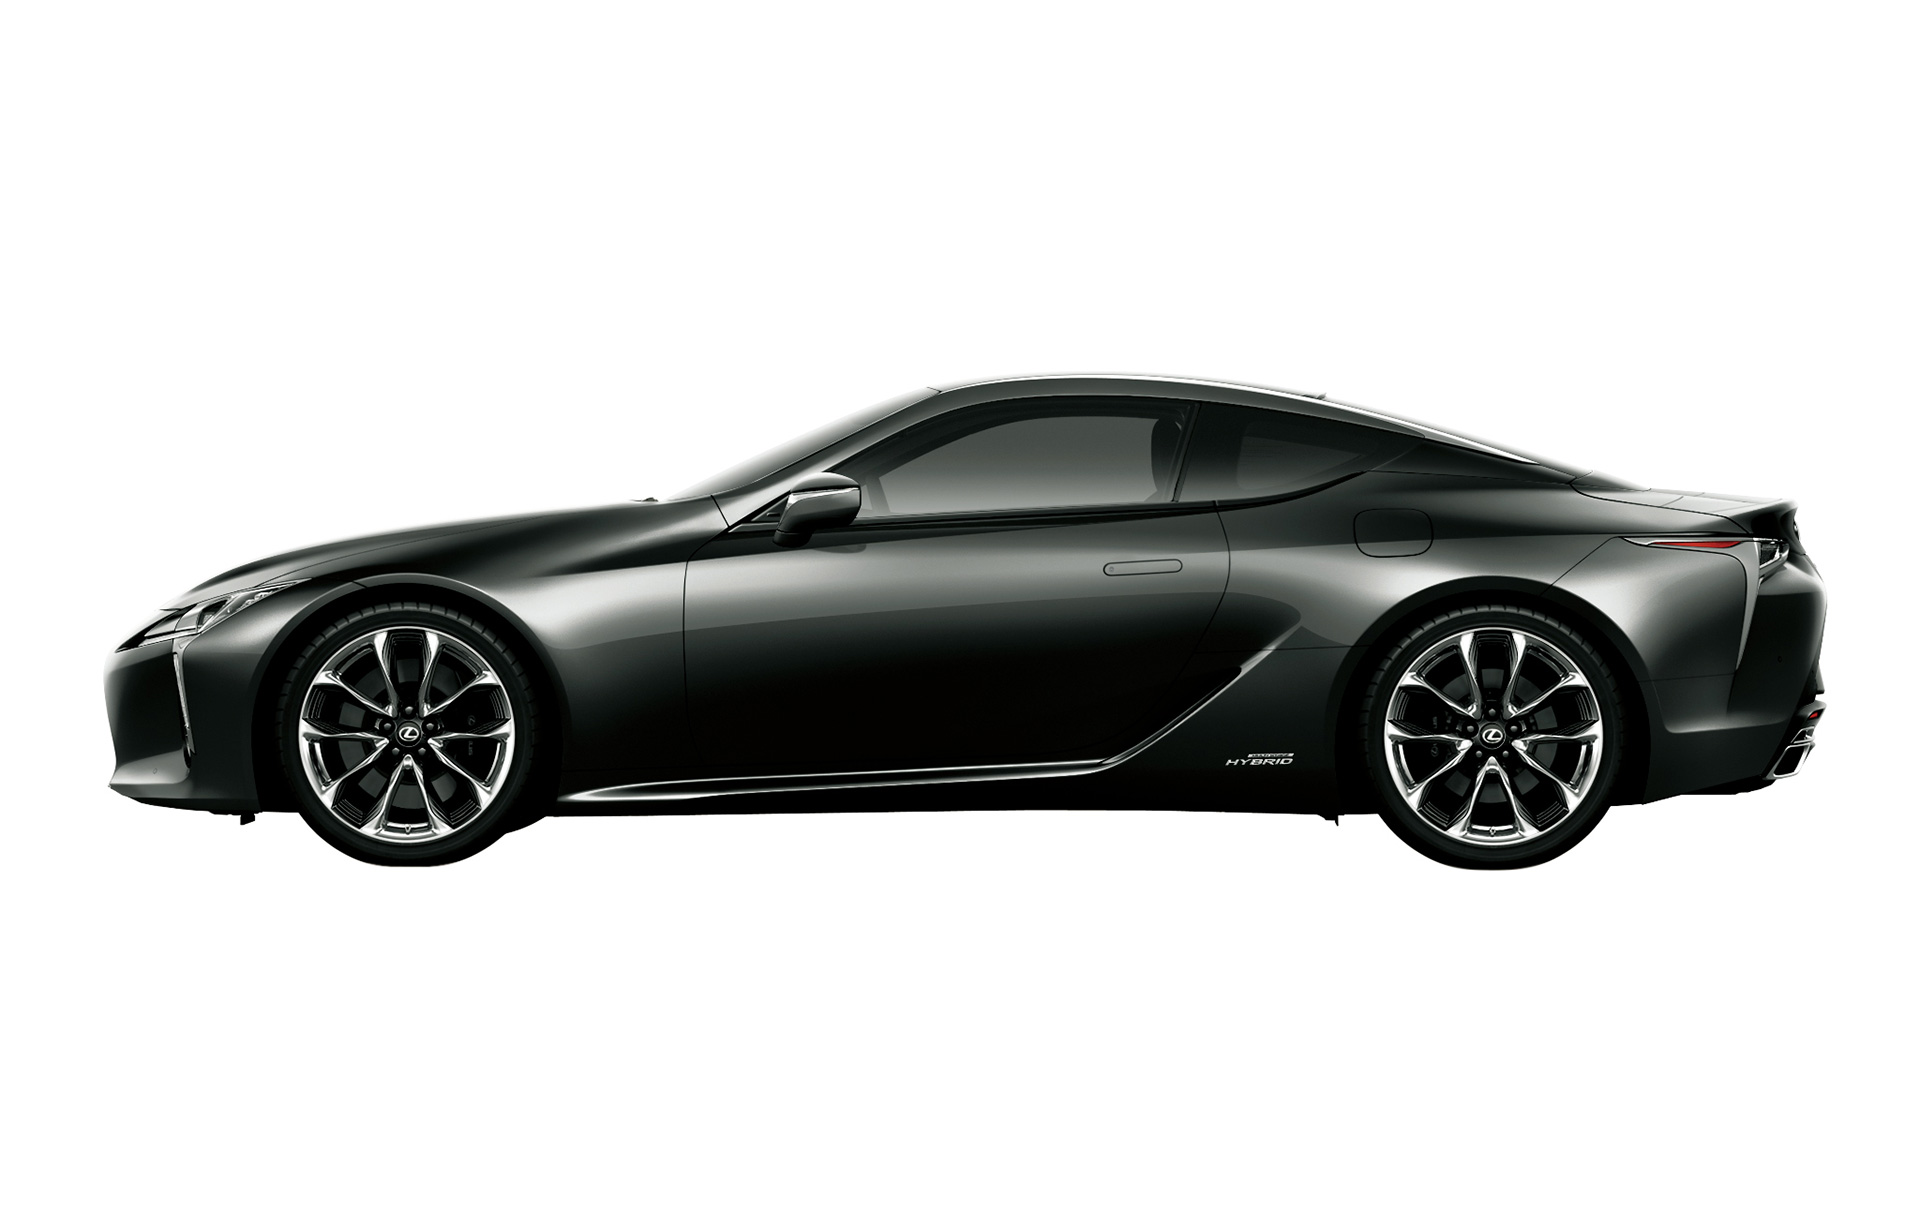 LC 500h S package (Graphite Black Glass Flake) | Toyota Motor